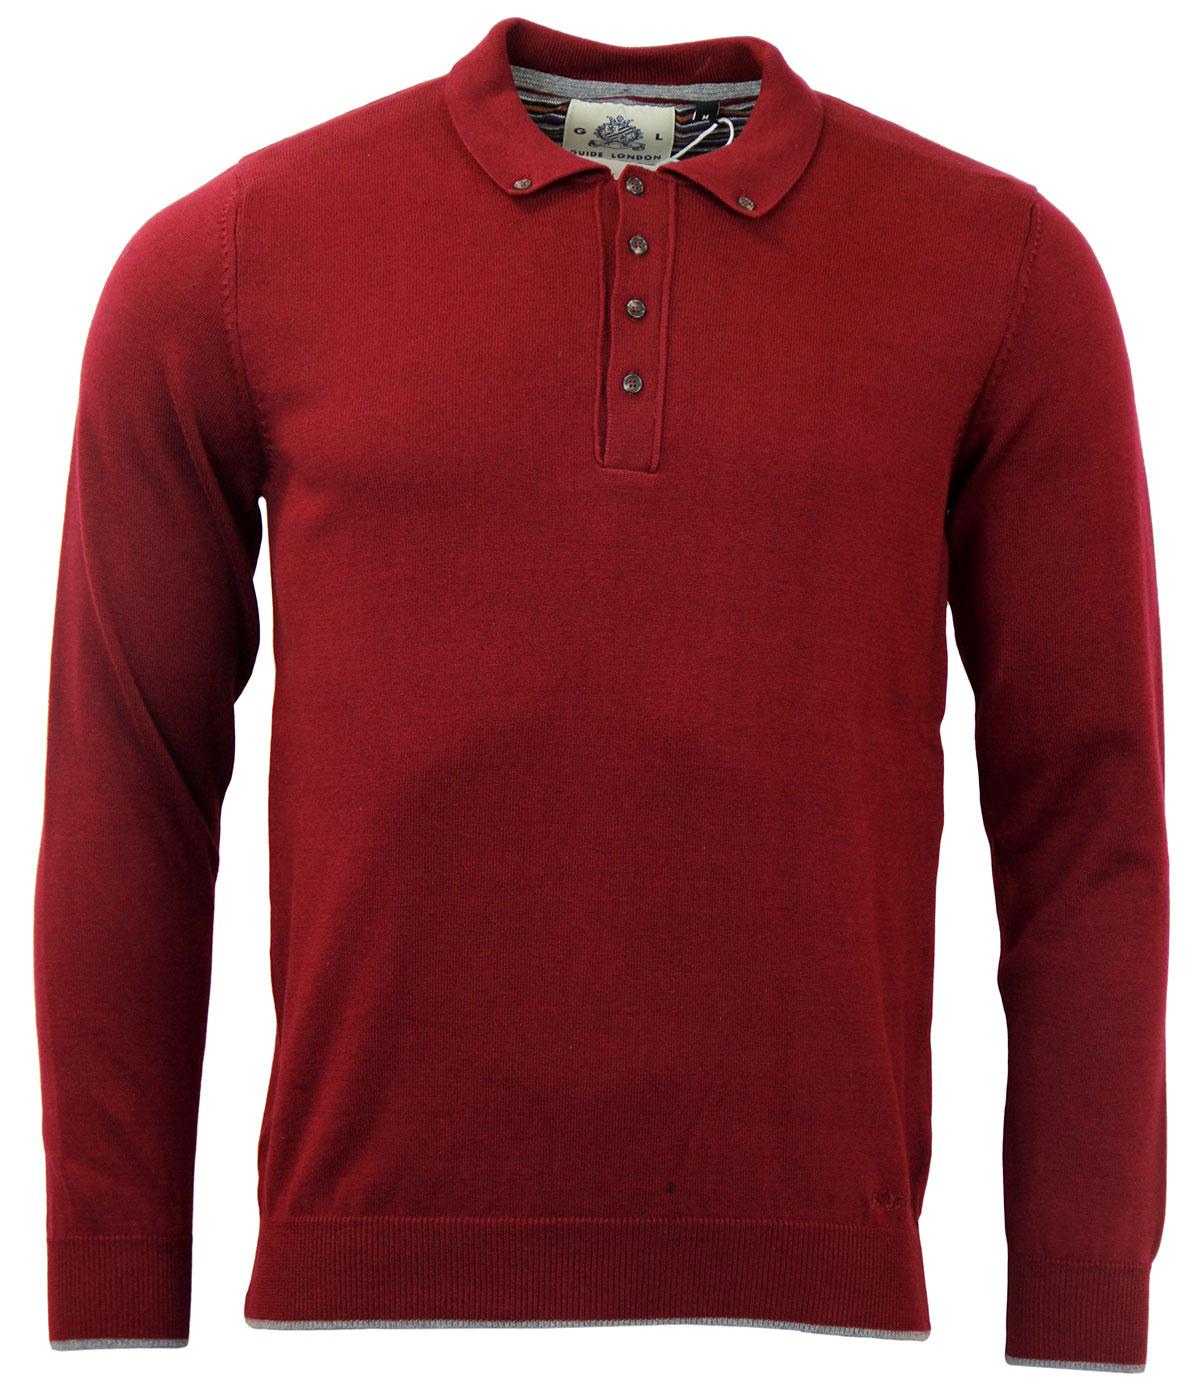 red long sleeve button down polo shirt